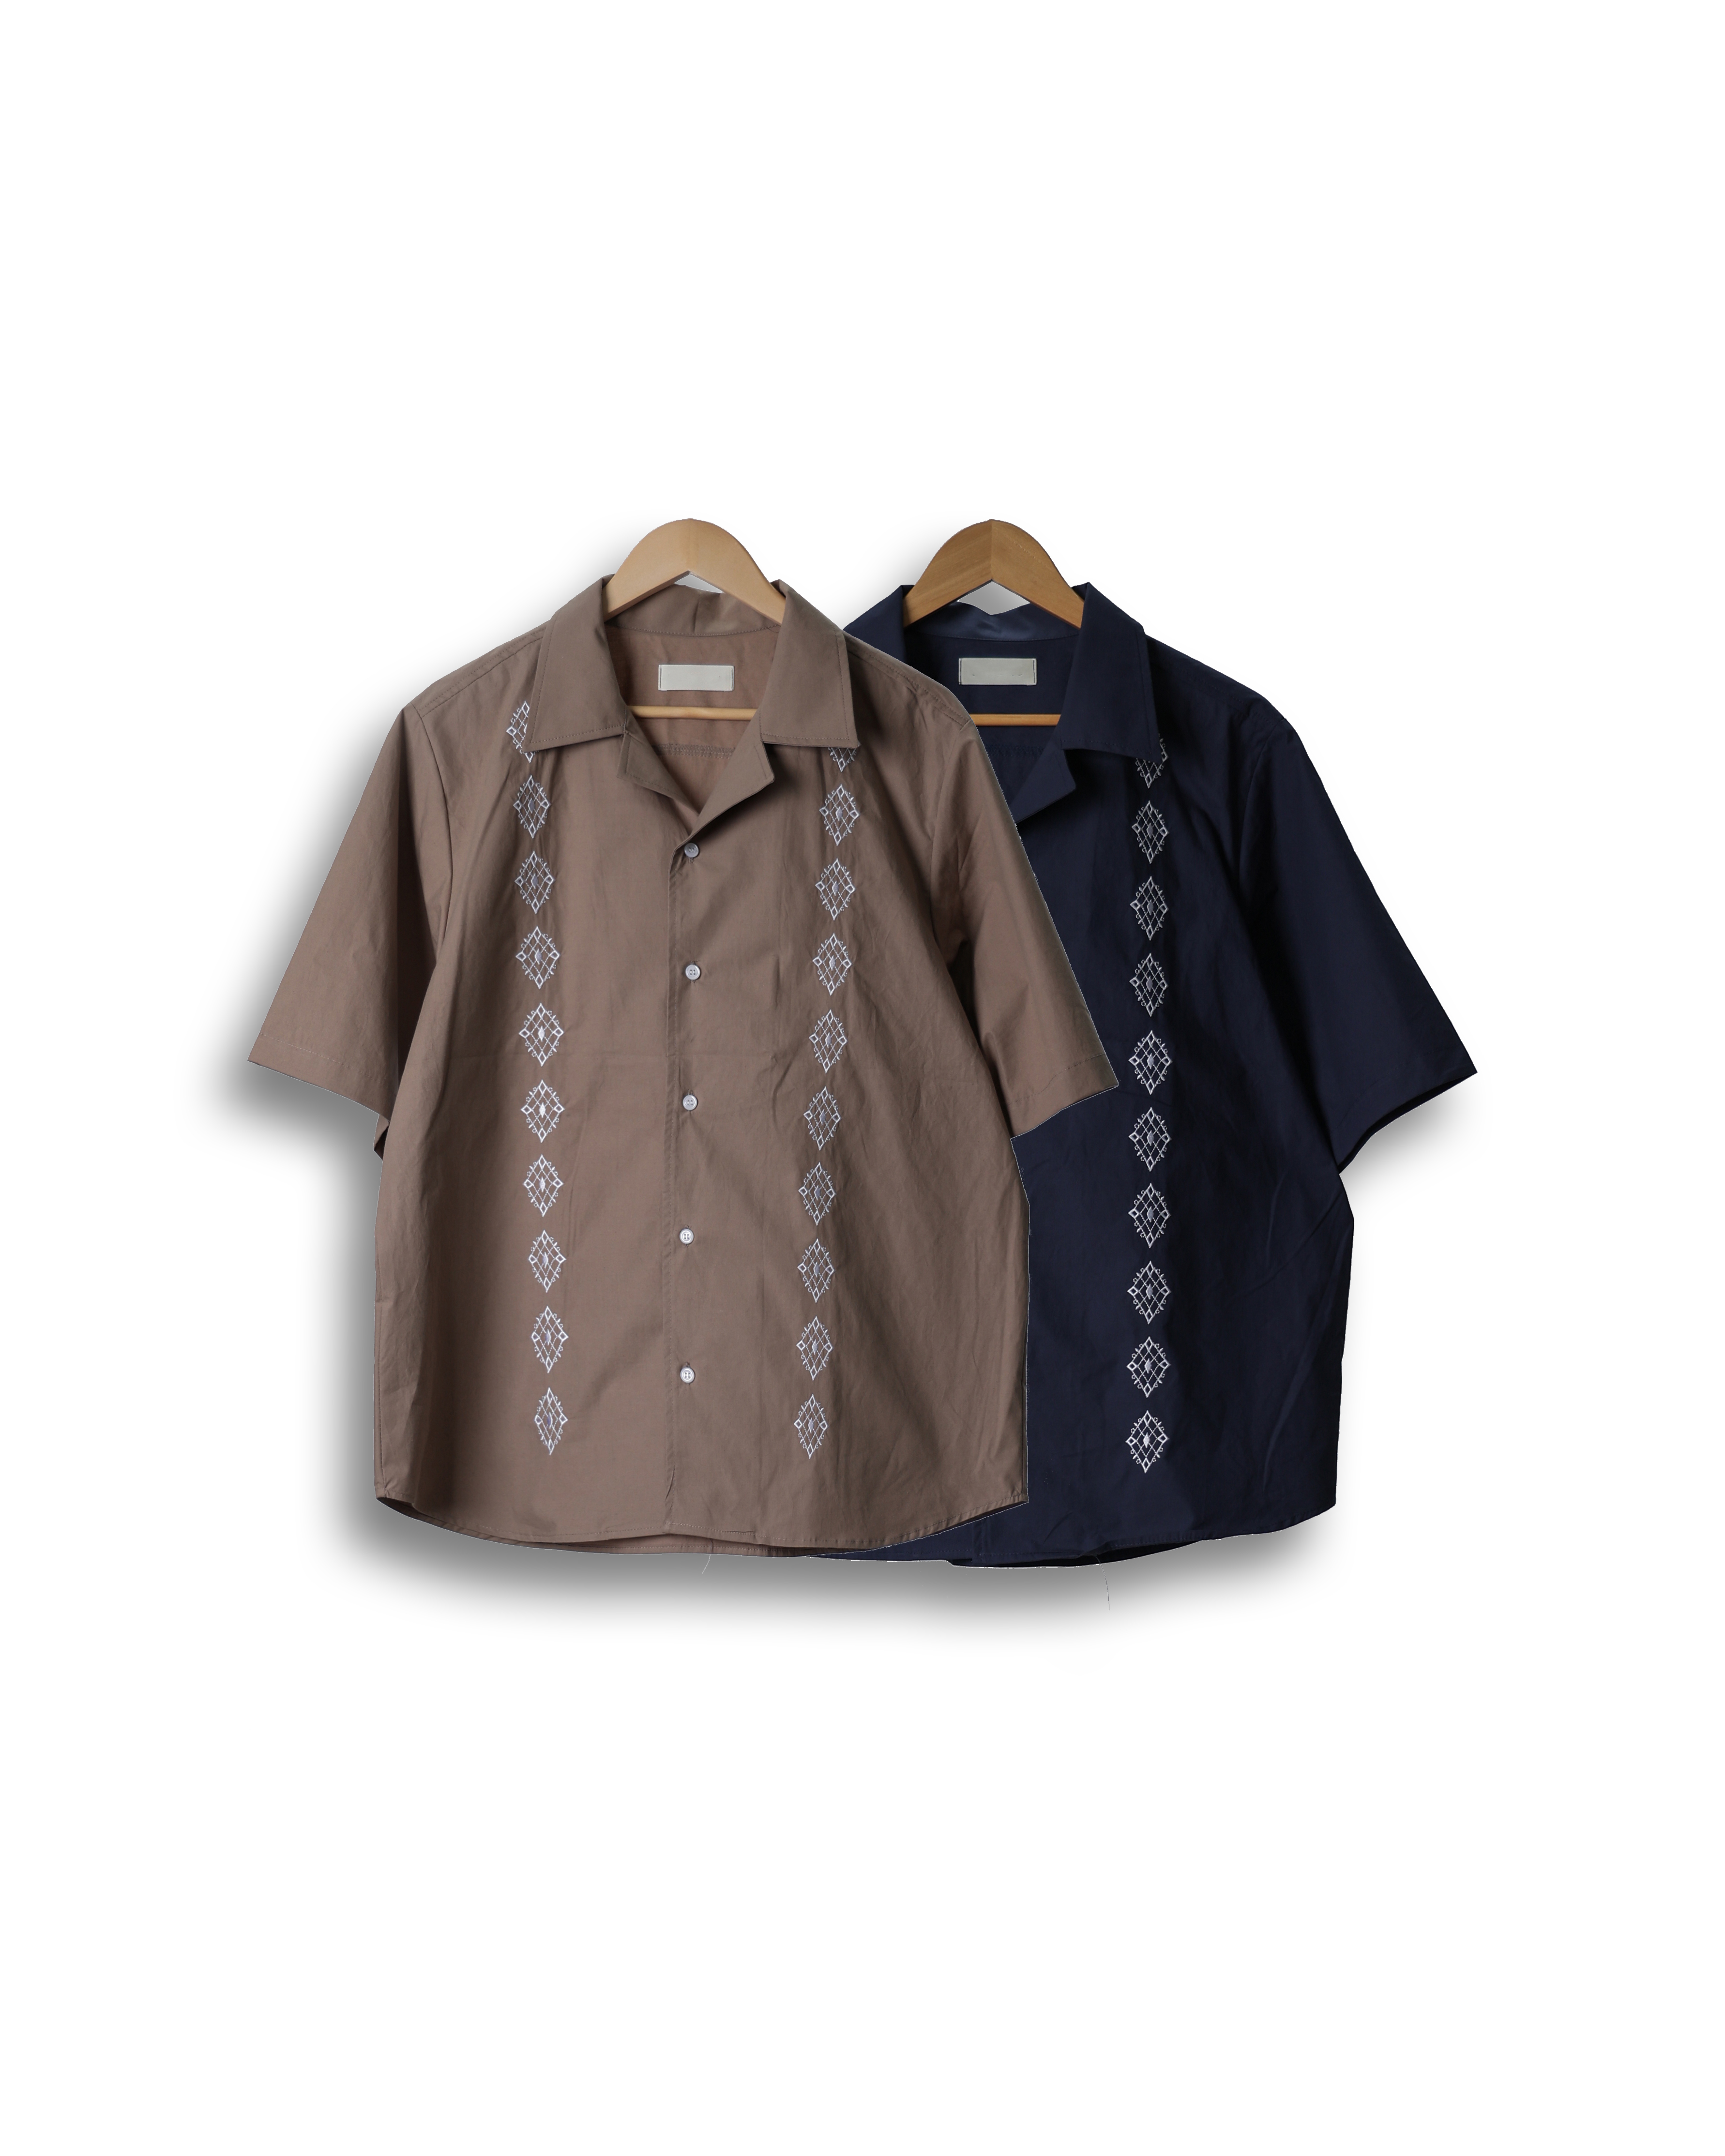 LIBRET Embo Patterned Open Collar Shirts (Navy/Beige)